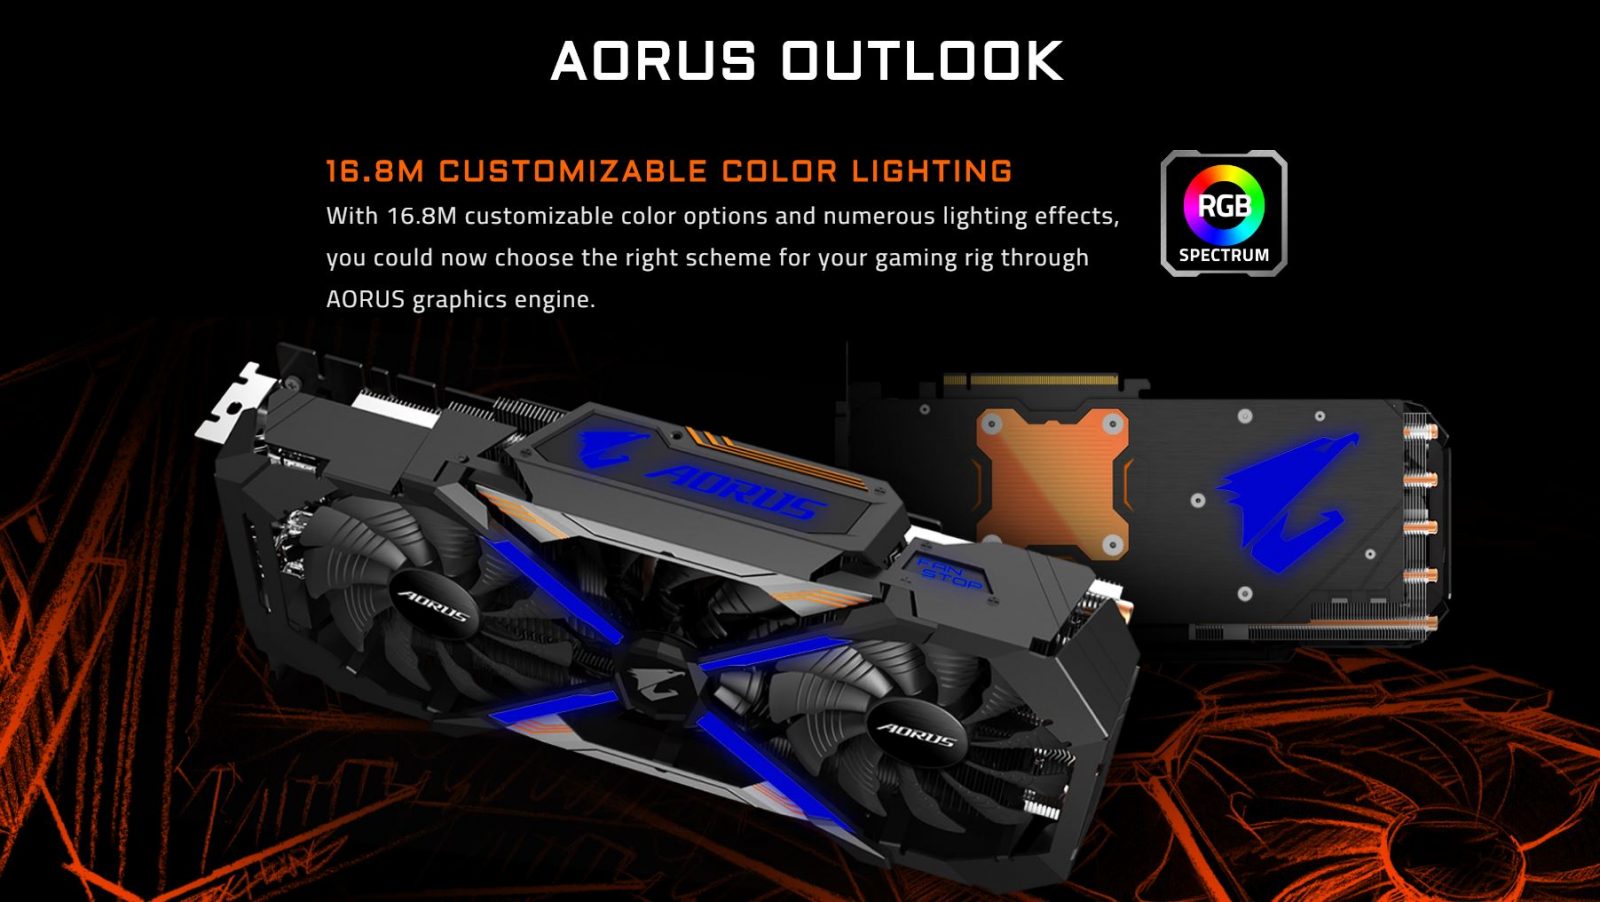 The first artwork released under the Aorus brand